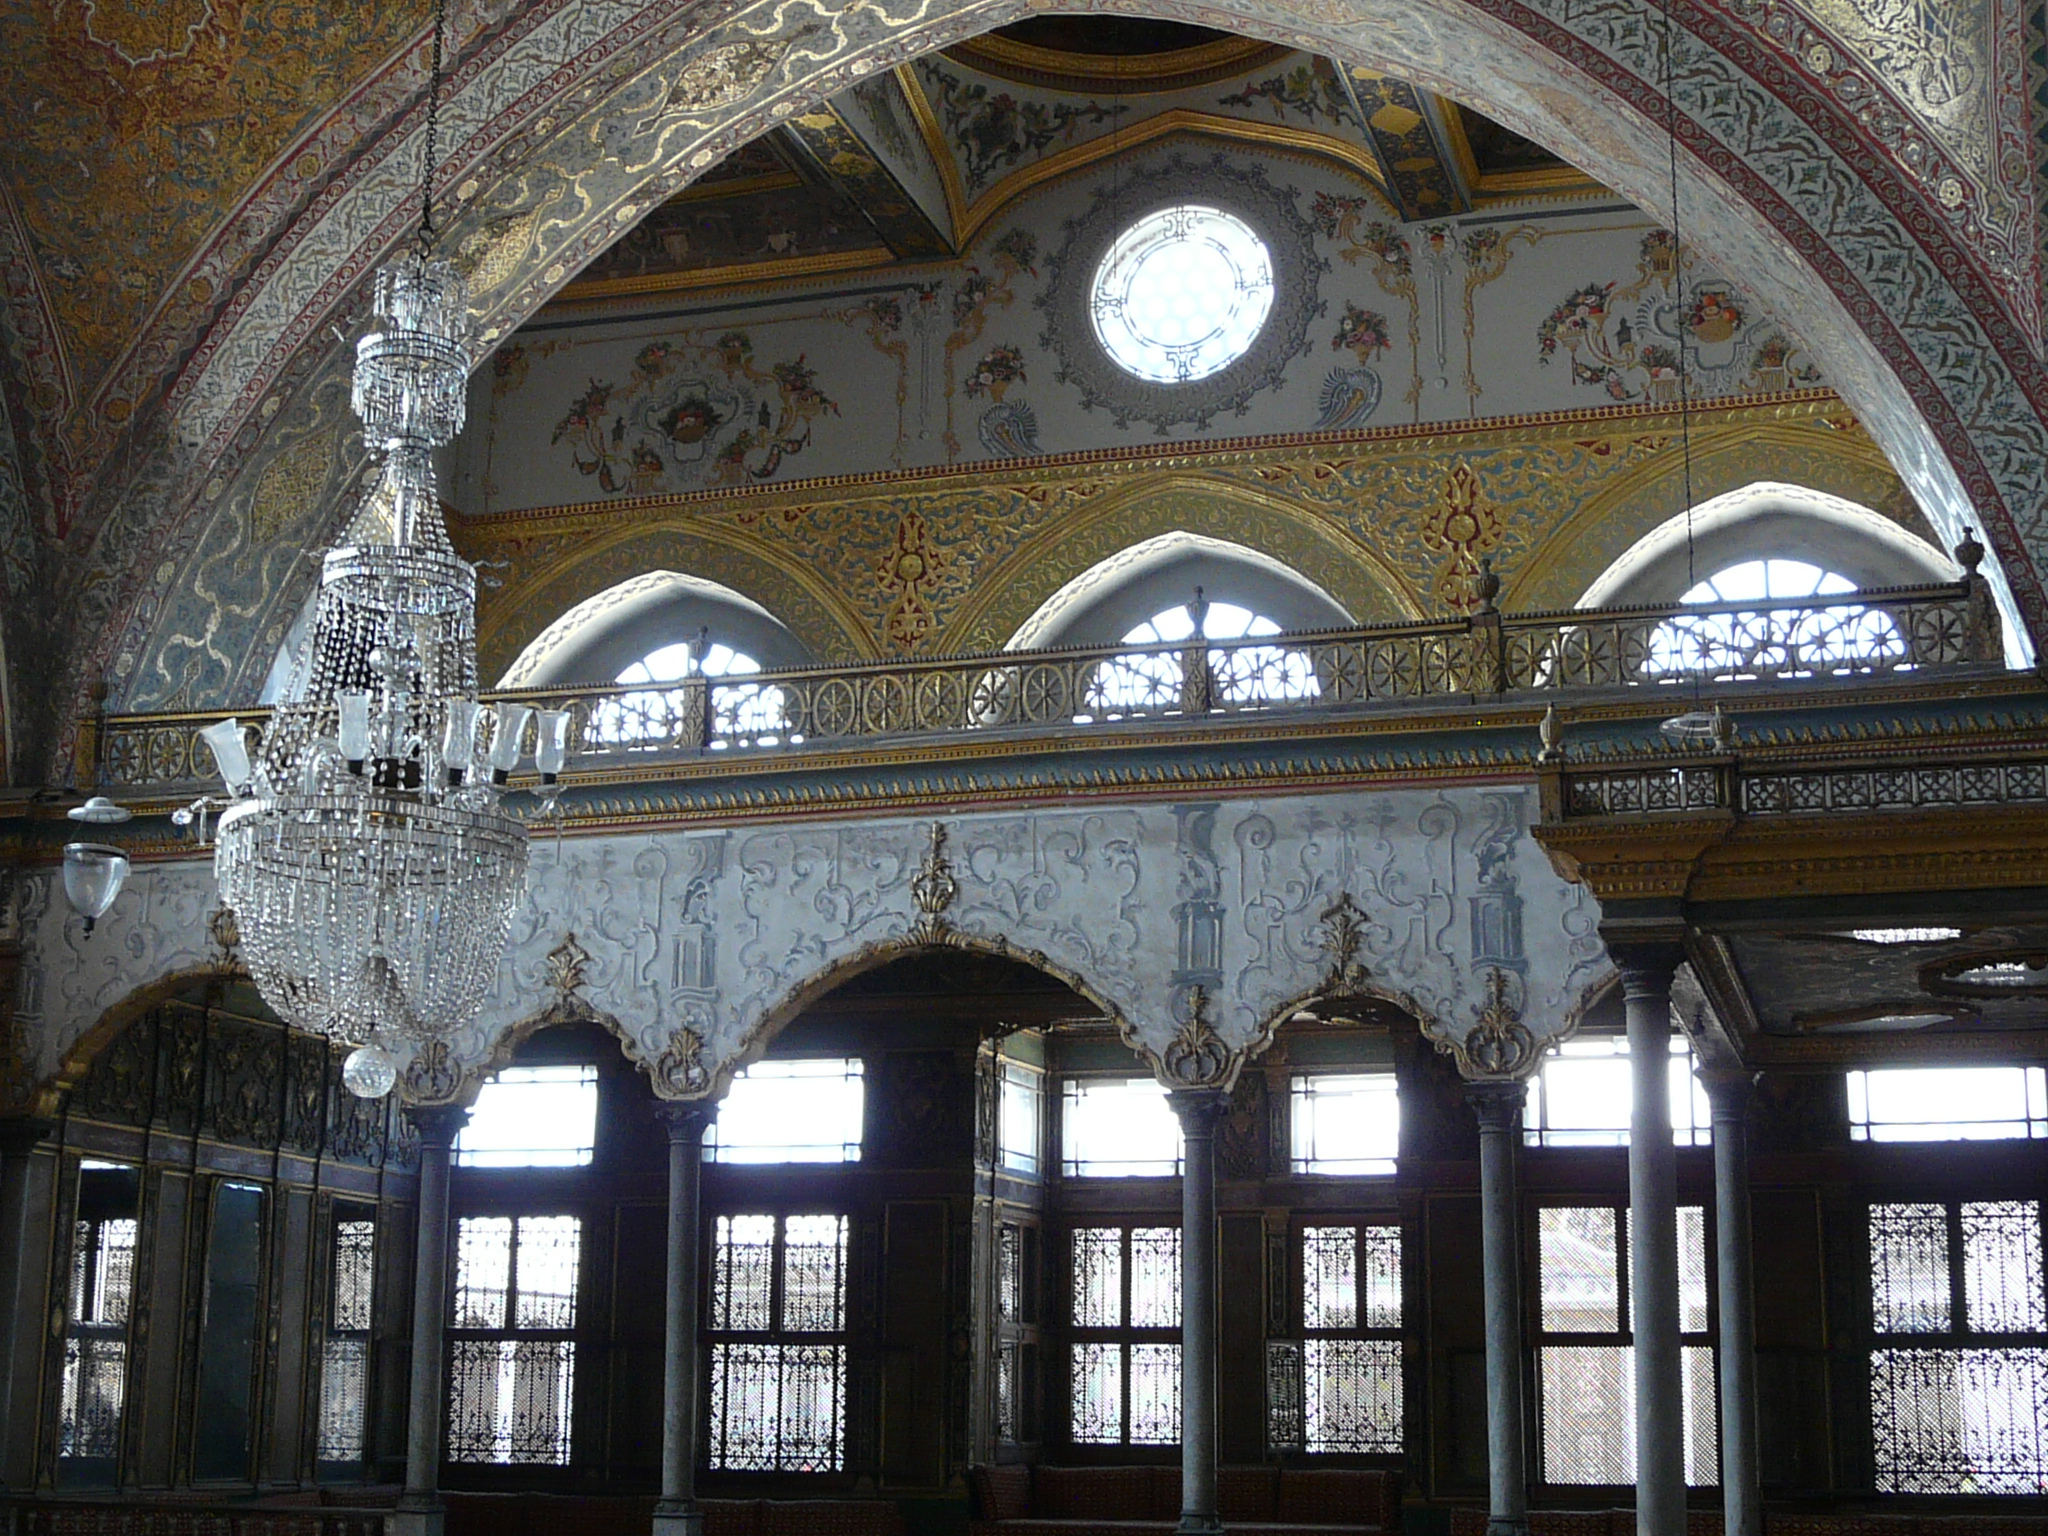  - 09Aug13_Istanbul_98_Tour_Topkapi_Palace_Harem_sultan_s_private_apartments_Imperial_Hall